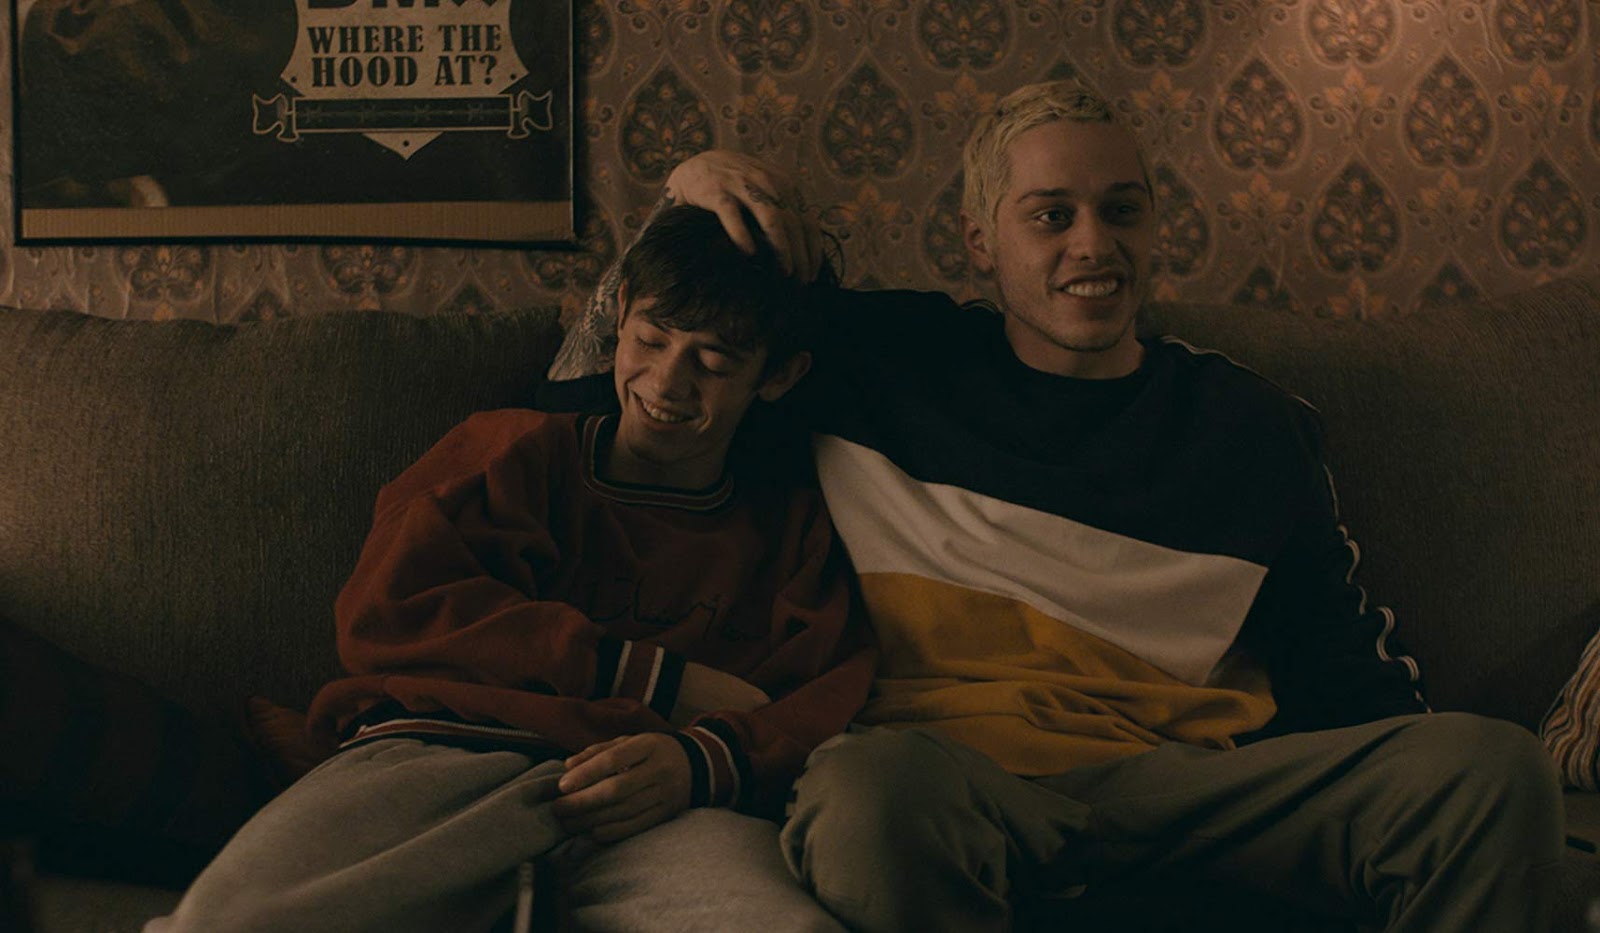 MOVIES: Big Time Adolescence - Review [Sundance 2019]